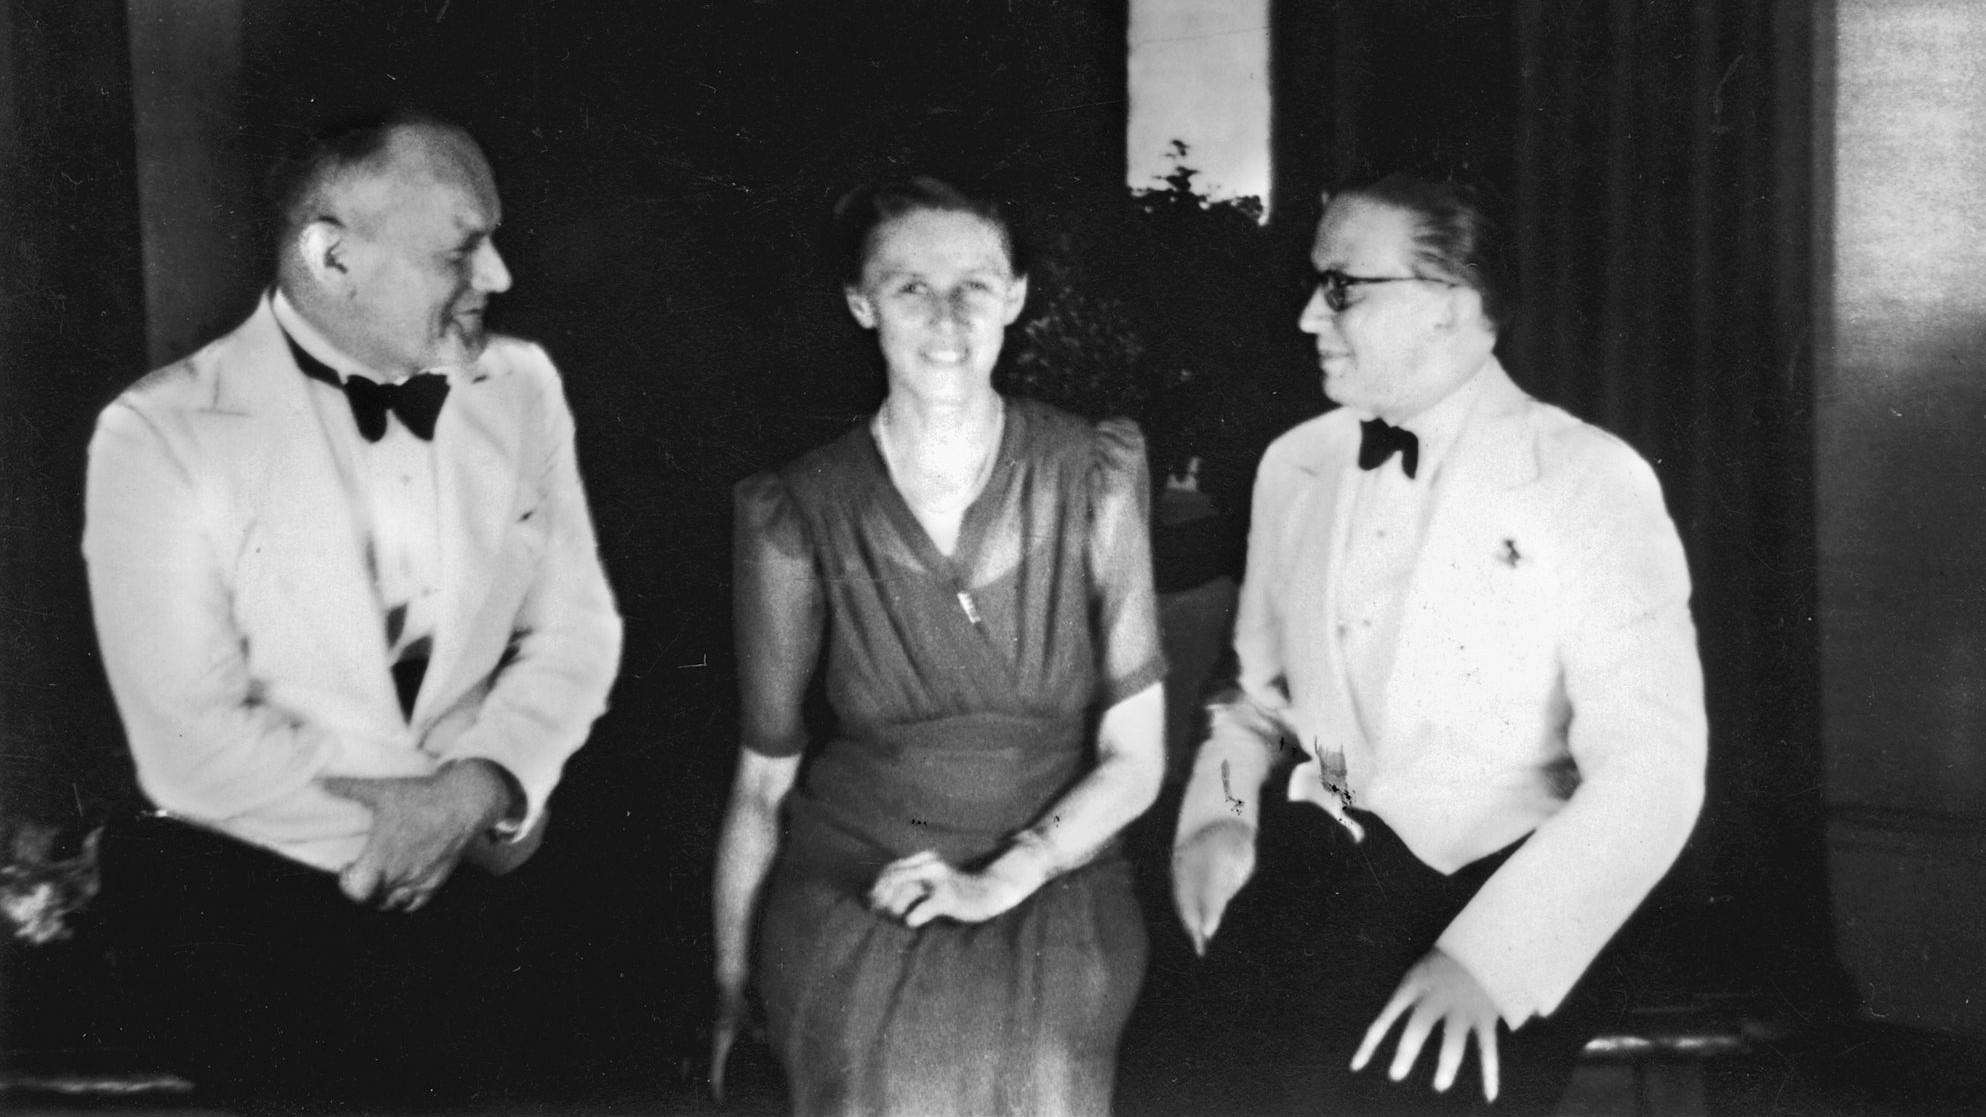 Ambassador Eugen Ott (left) with his private secretary, Fraülein Bauart, and his second in command, Erich Kordt, at a party for Ott’s son in 1942. Minister Plenipotentiary Kordt had twice plotted unsuccessfully to kill Hitler, says Wickert.